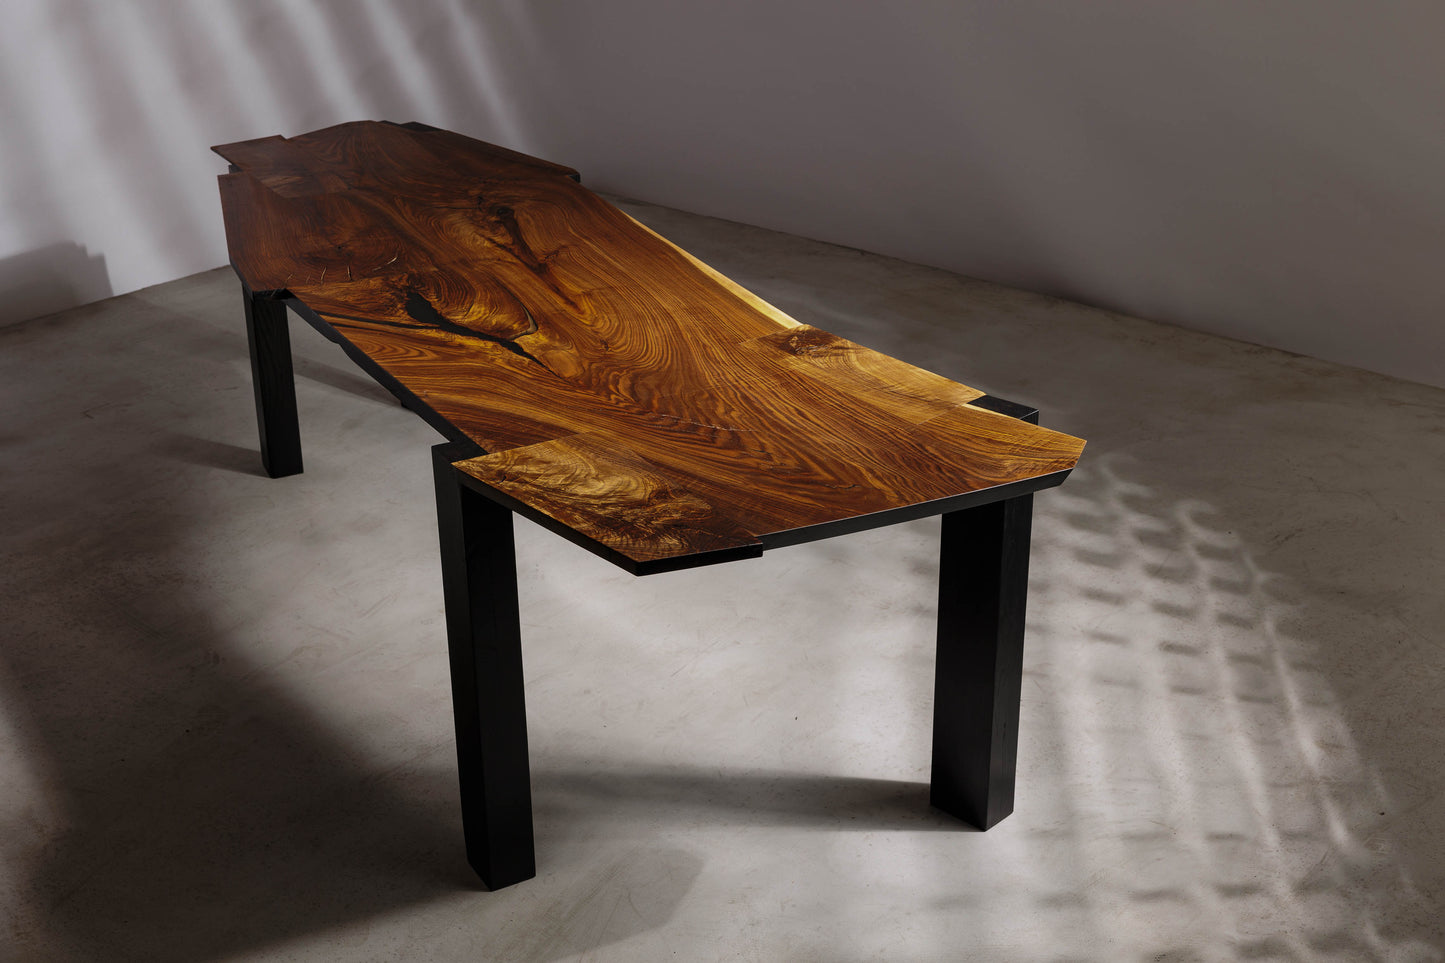 EM201 Of 18Brut Collection | Perspective image of the table showing the wider part of the table. 